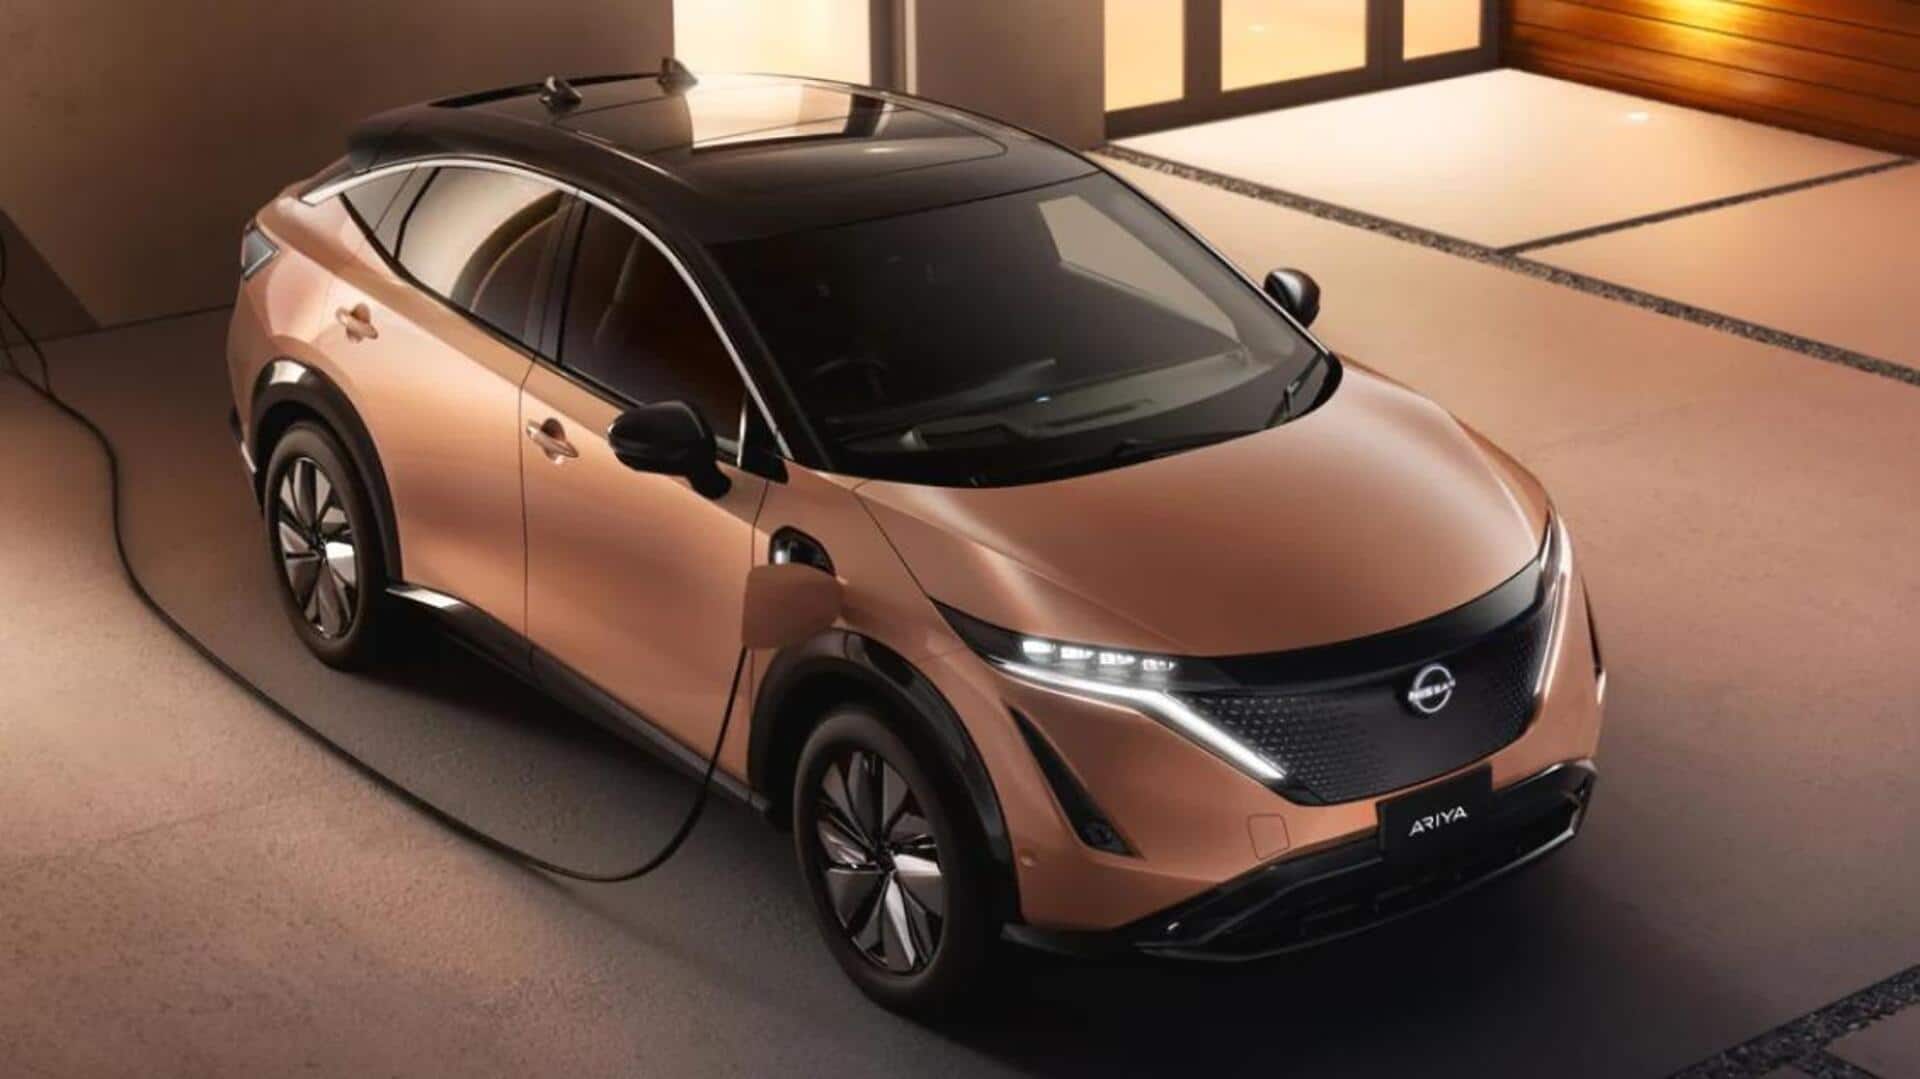 Nissan's all-electric ARIYA spied testing in India: What to expect